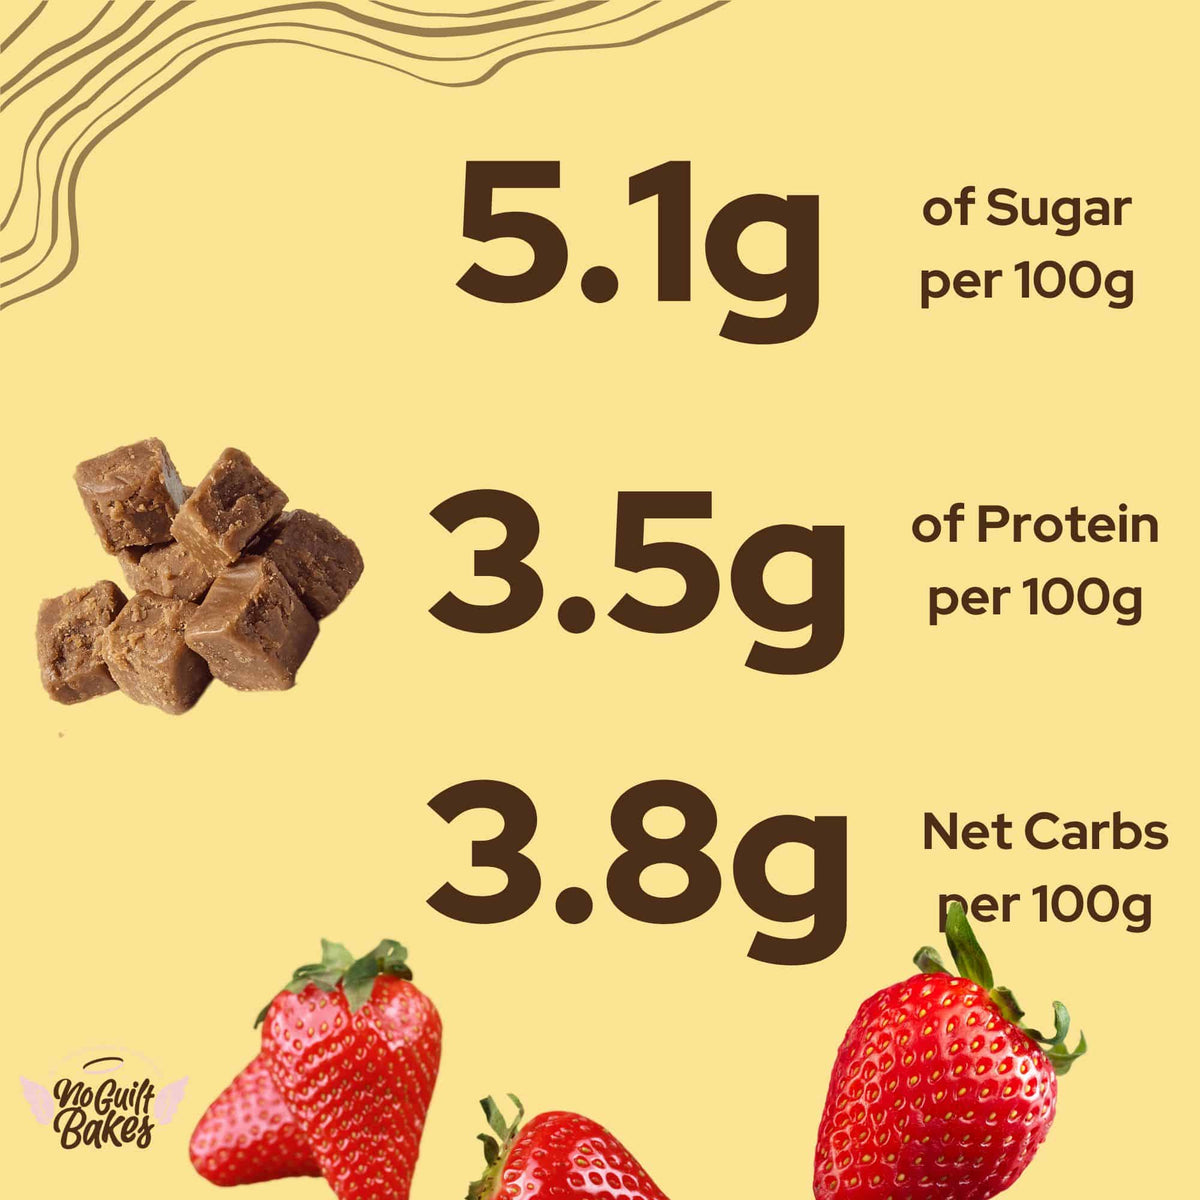 A poster showcasing the nutritional values of strawberries and the indulgent sweet treat duo of No Guilt Bakes Belgian Chocolate Keto Fudge and Belgian Caramel Keto Fudge from their Keto Fudge Bundle.